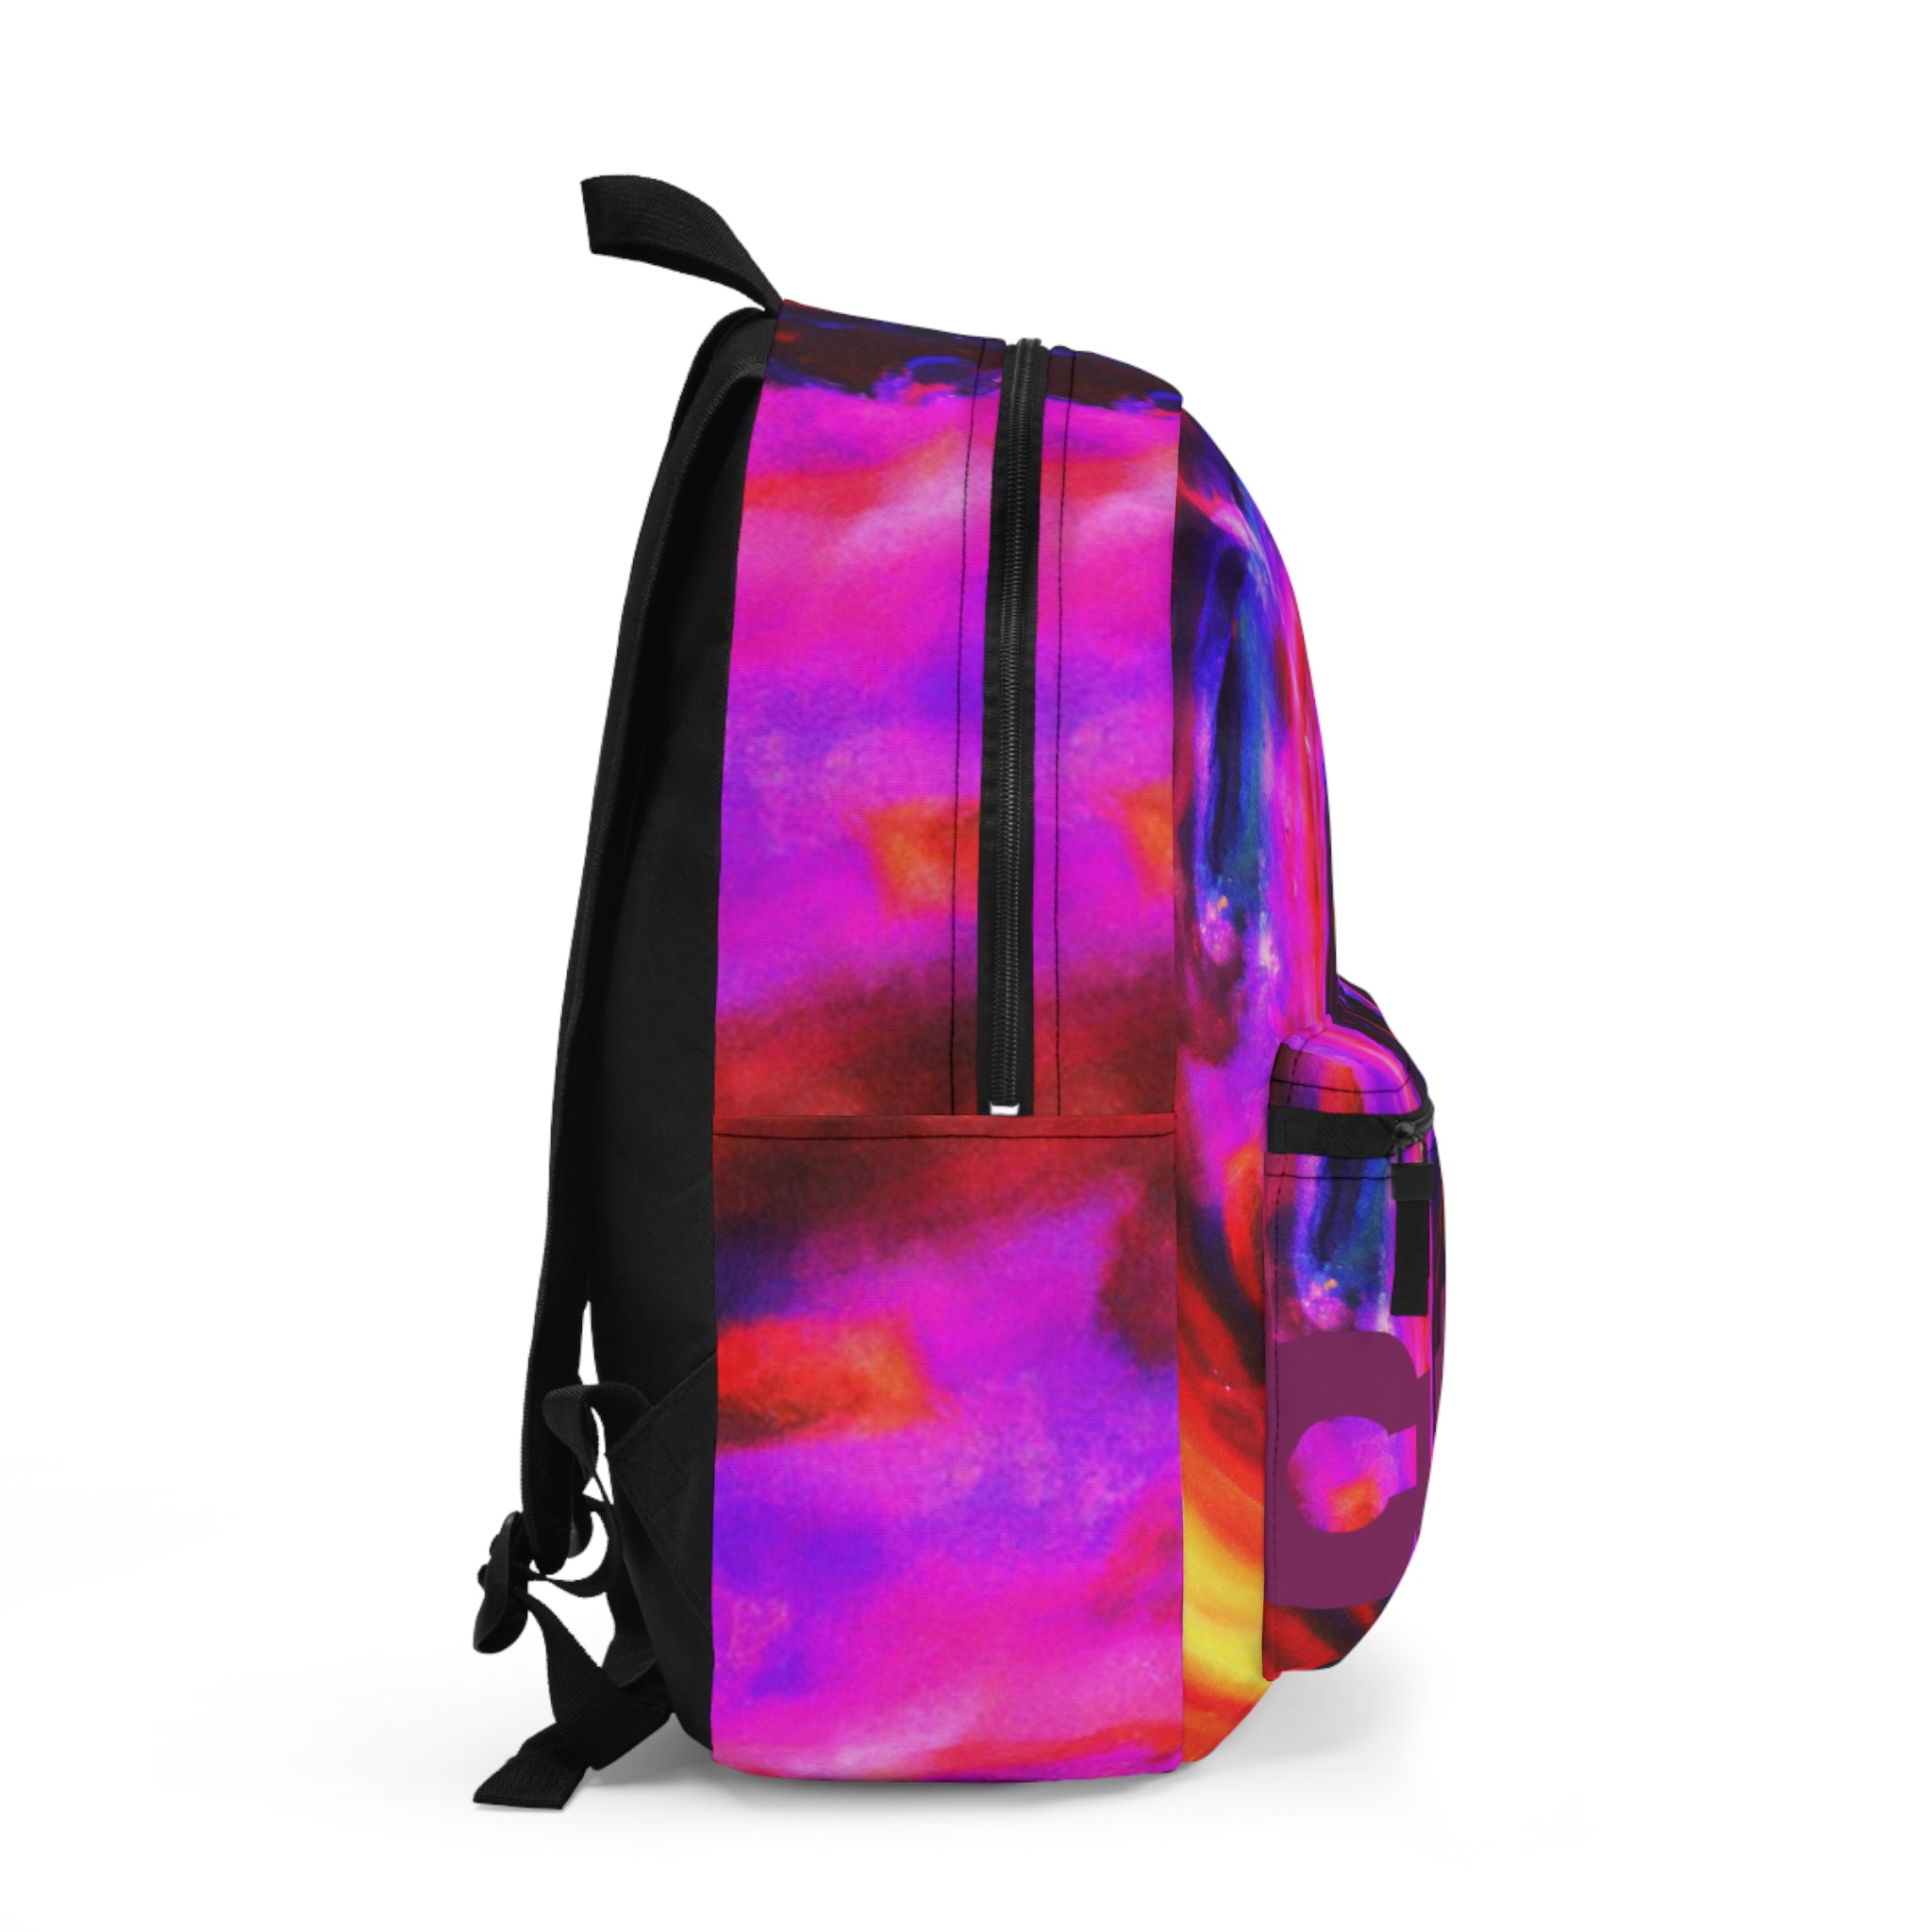 "The Dimensional Voyage: A Backpack Through Galaxies and Beyond"- Backpack